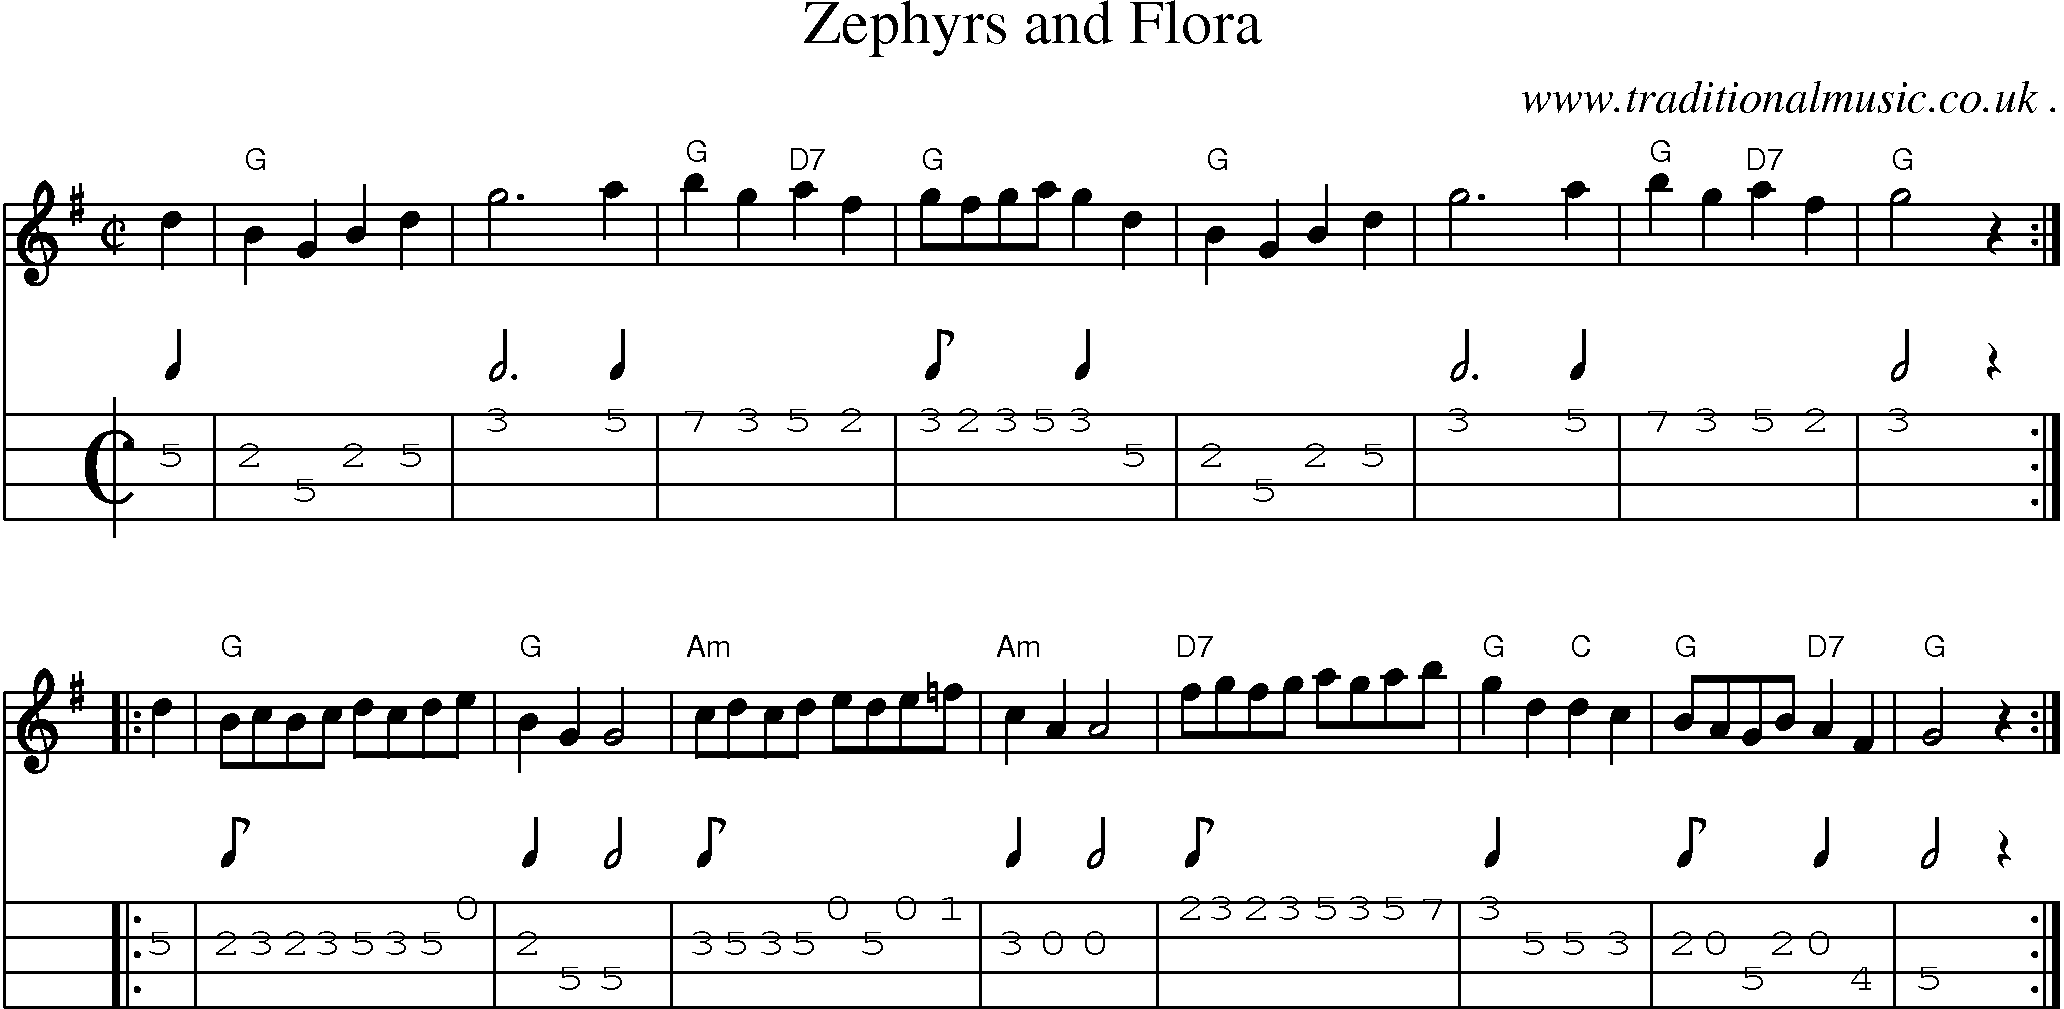 Sheet-music  score, Chords and Mandolin Tabs for Zephyrs And Flora